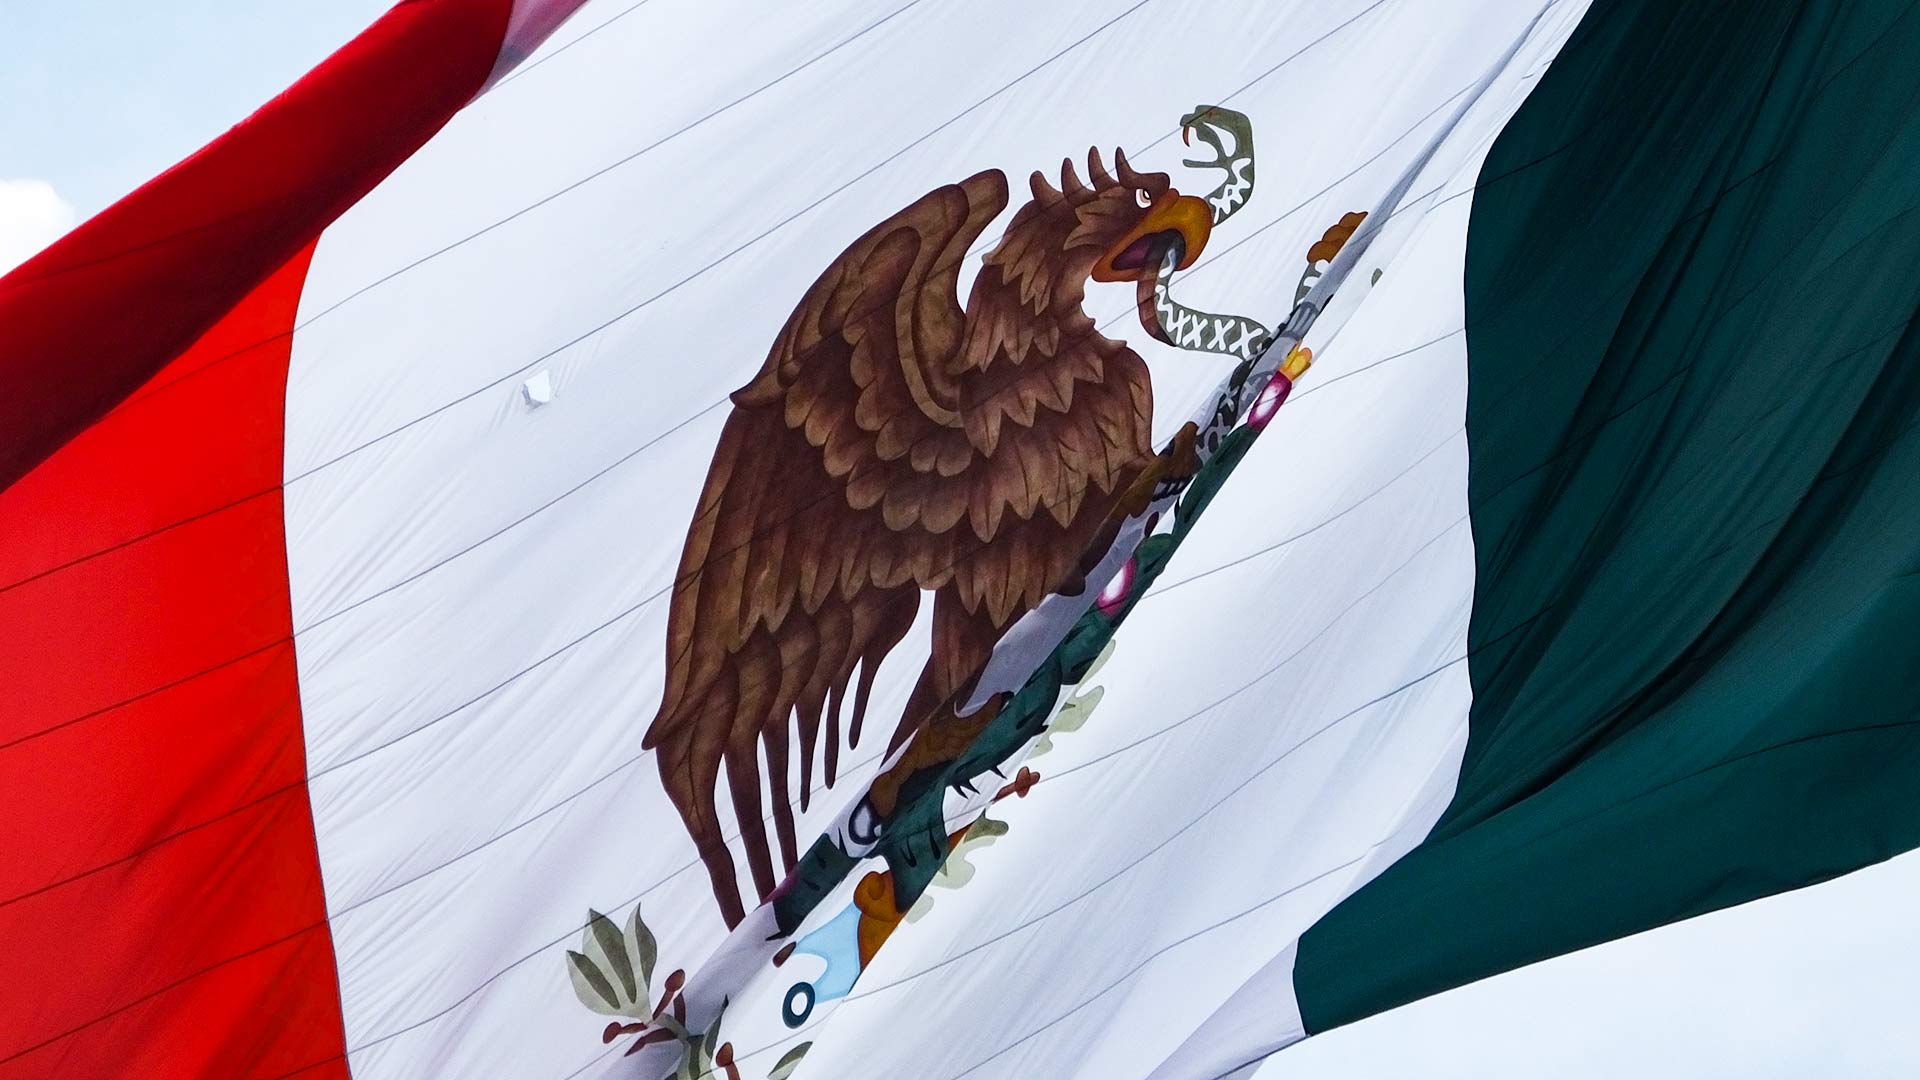 The flag of Mexico.